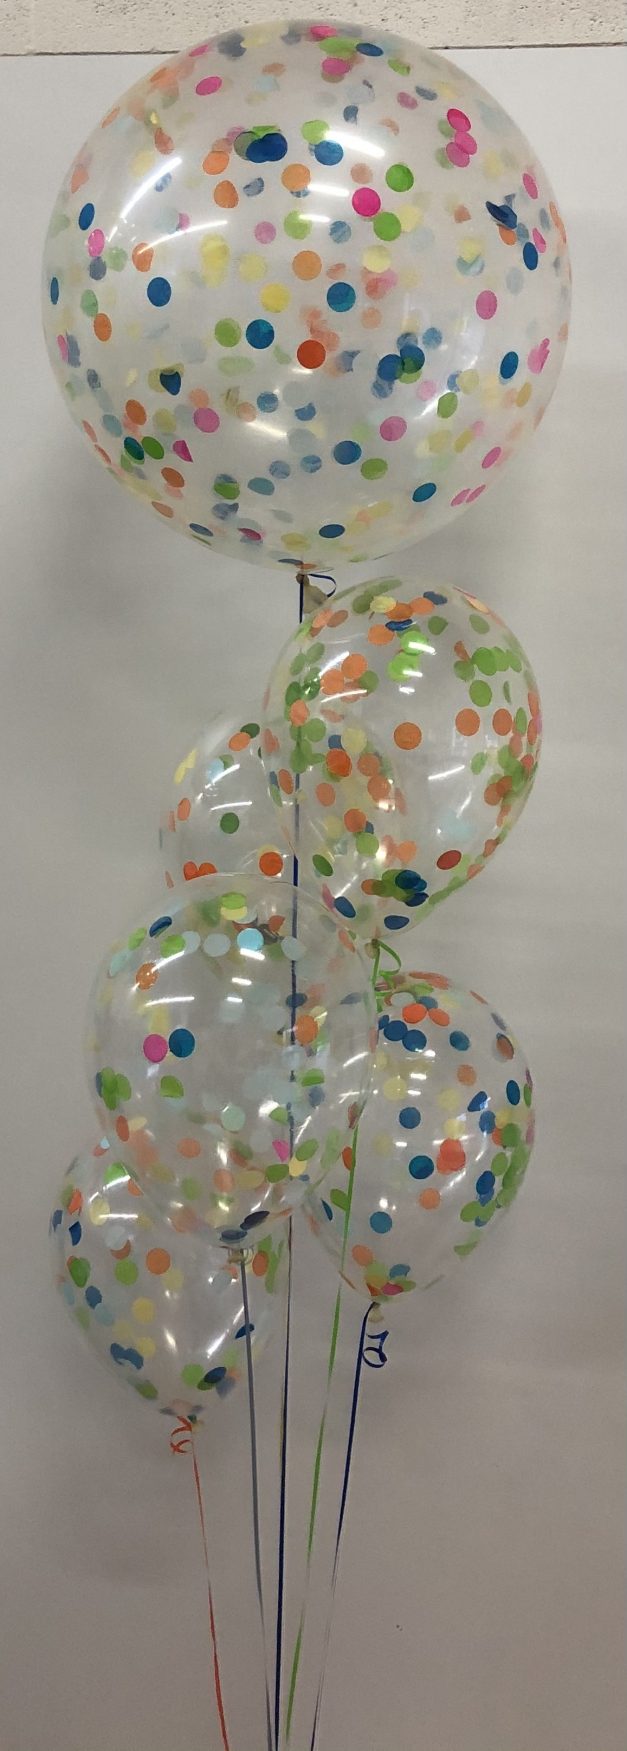 group of 5 confetti balloons with large on top